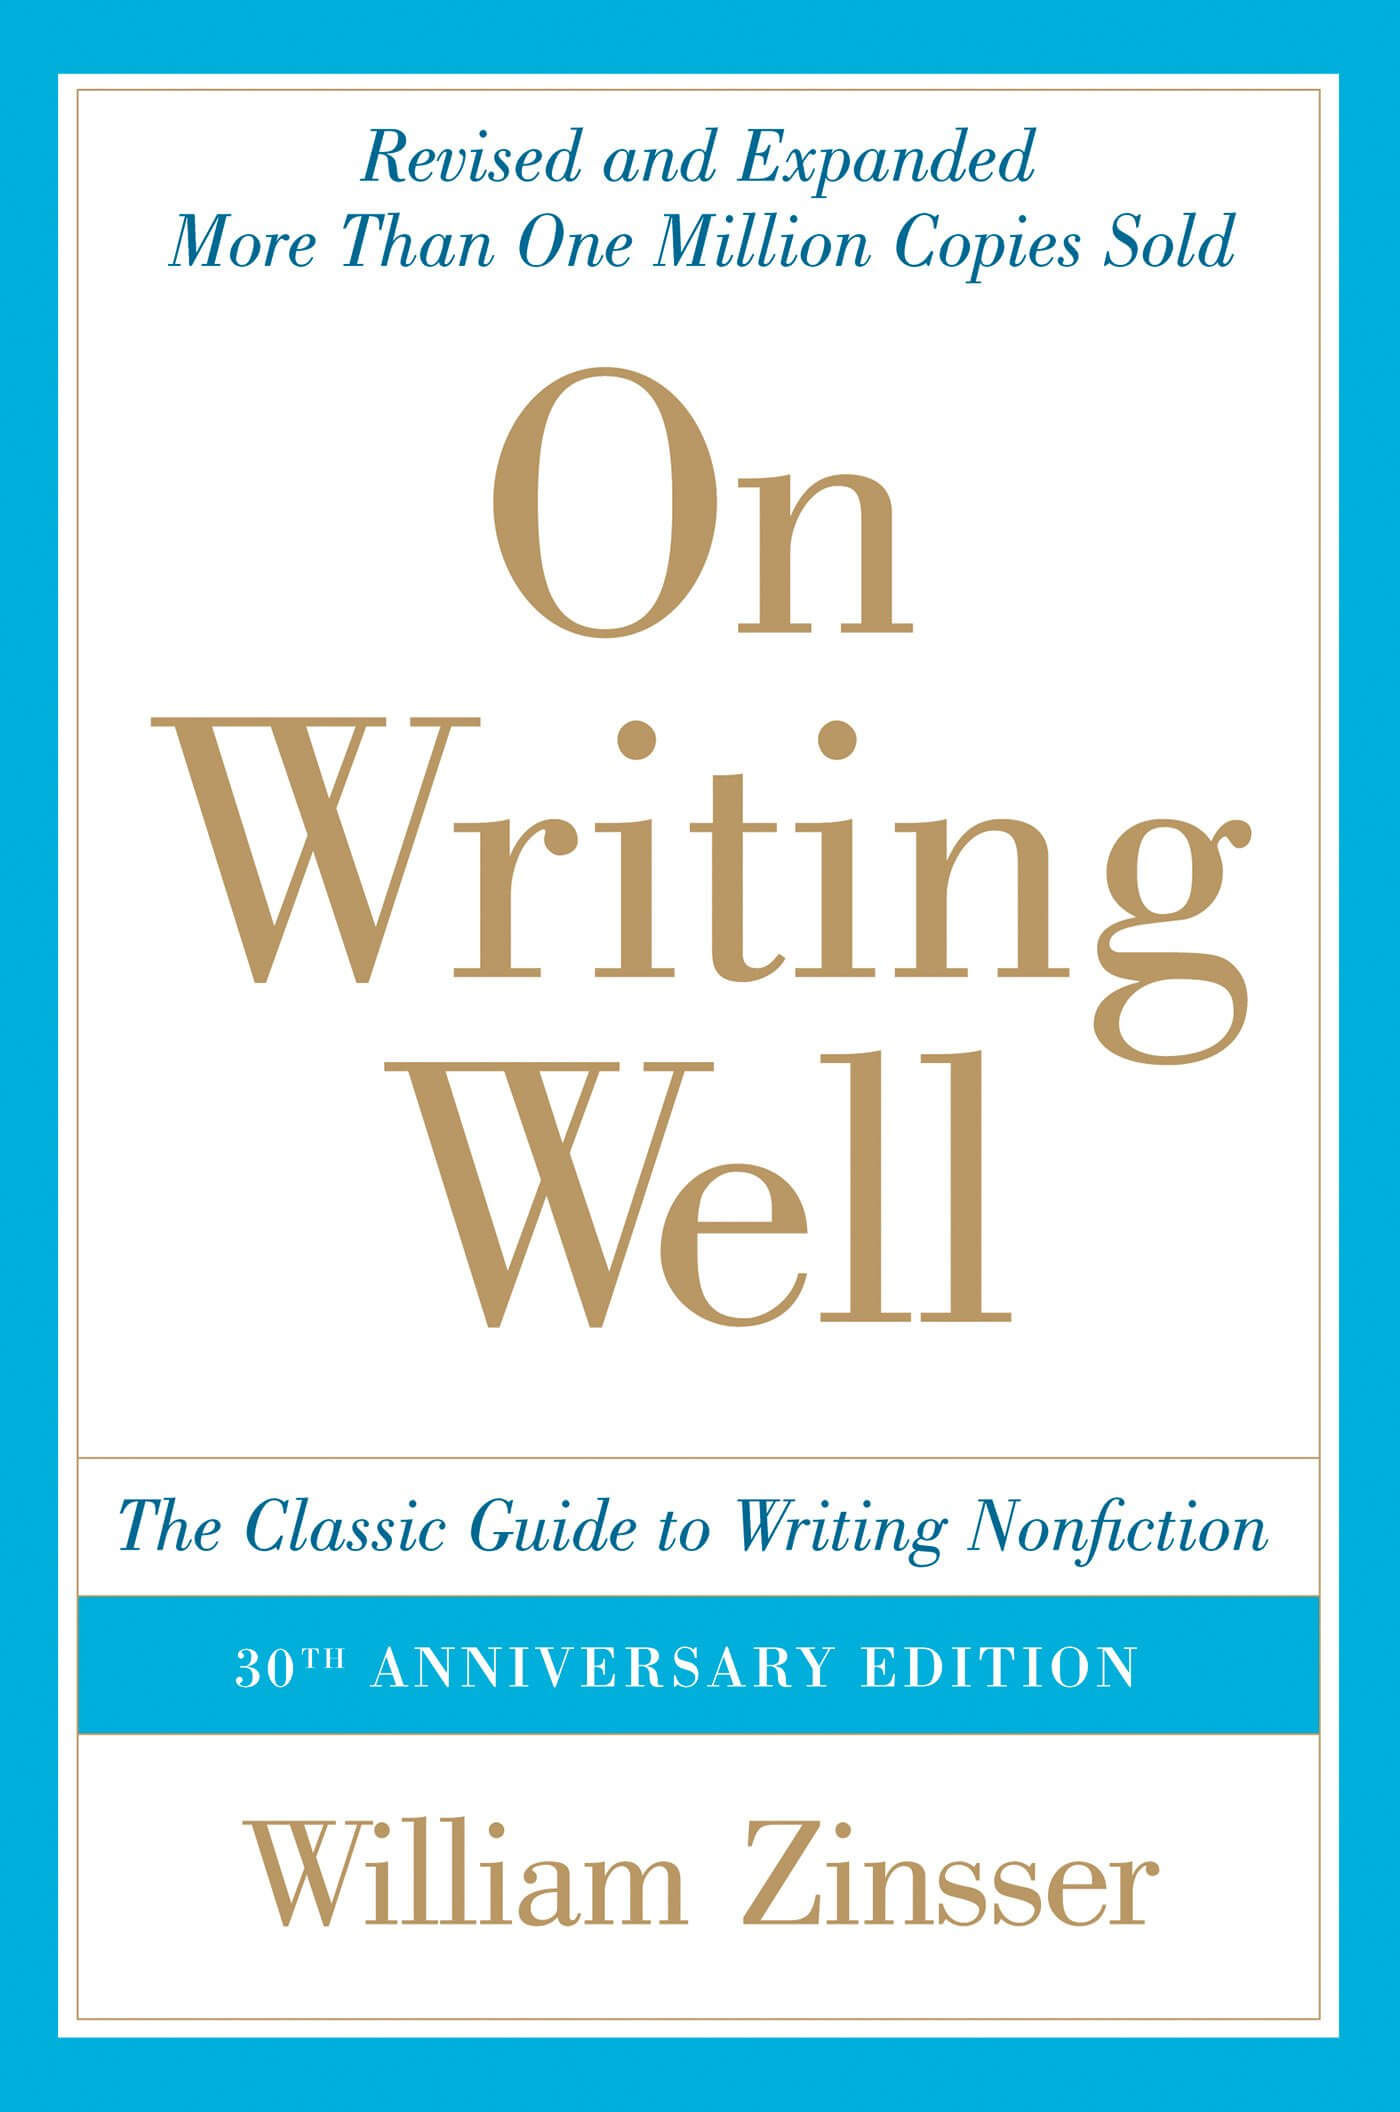 Book cover for William Zinsser's "On Writing Well"